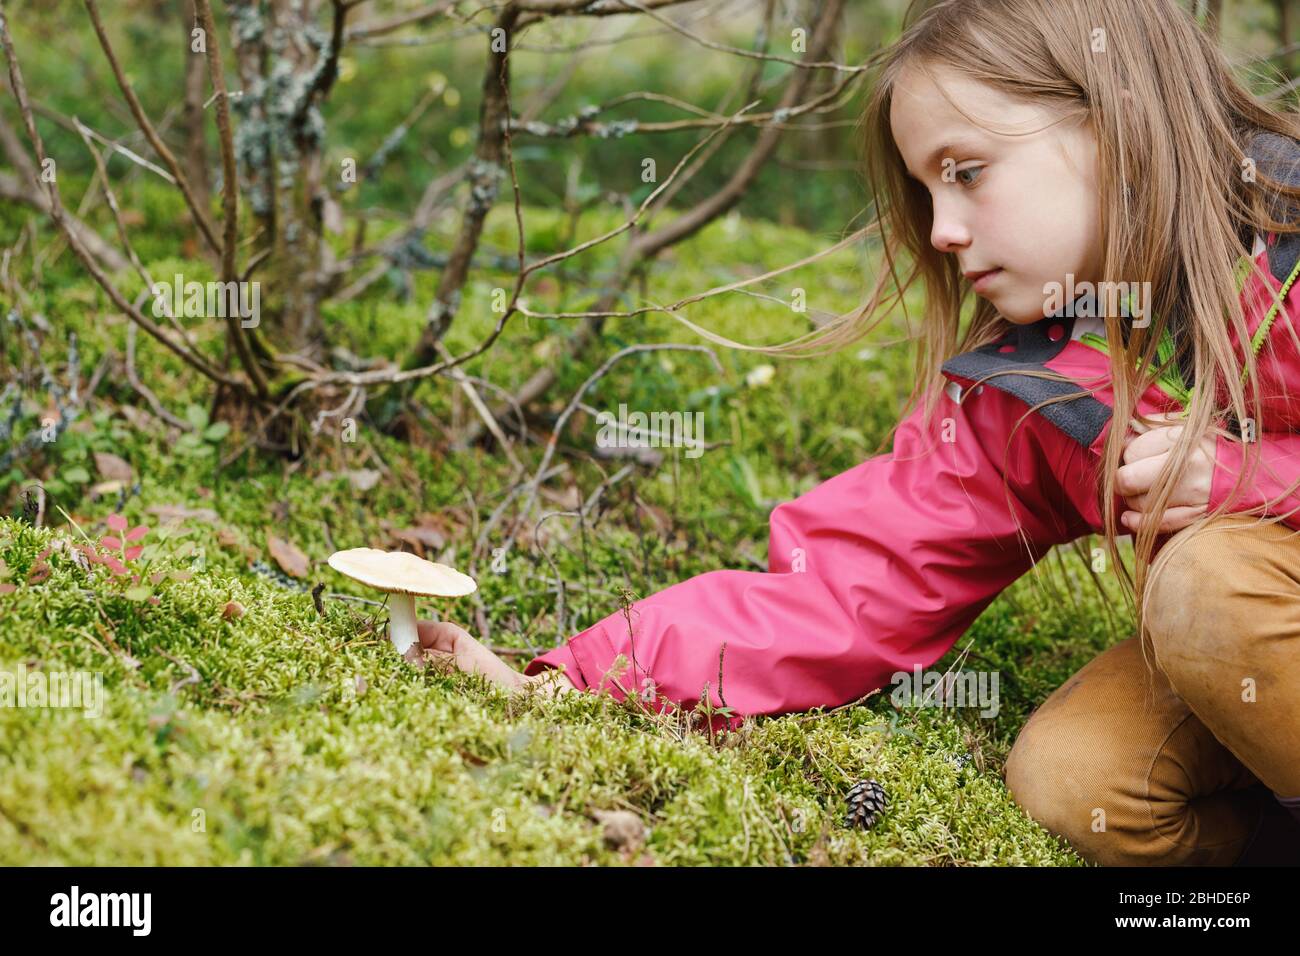 Elementary age girl found a potentially dangerous mushroom while camping in a forest - risk of child mushroom poisoning concept Stock Photo